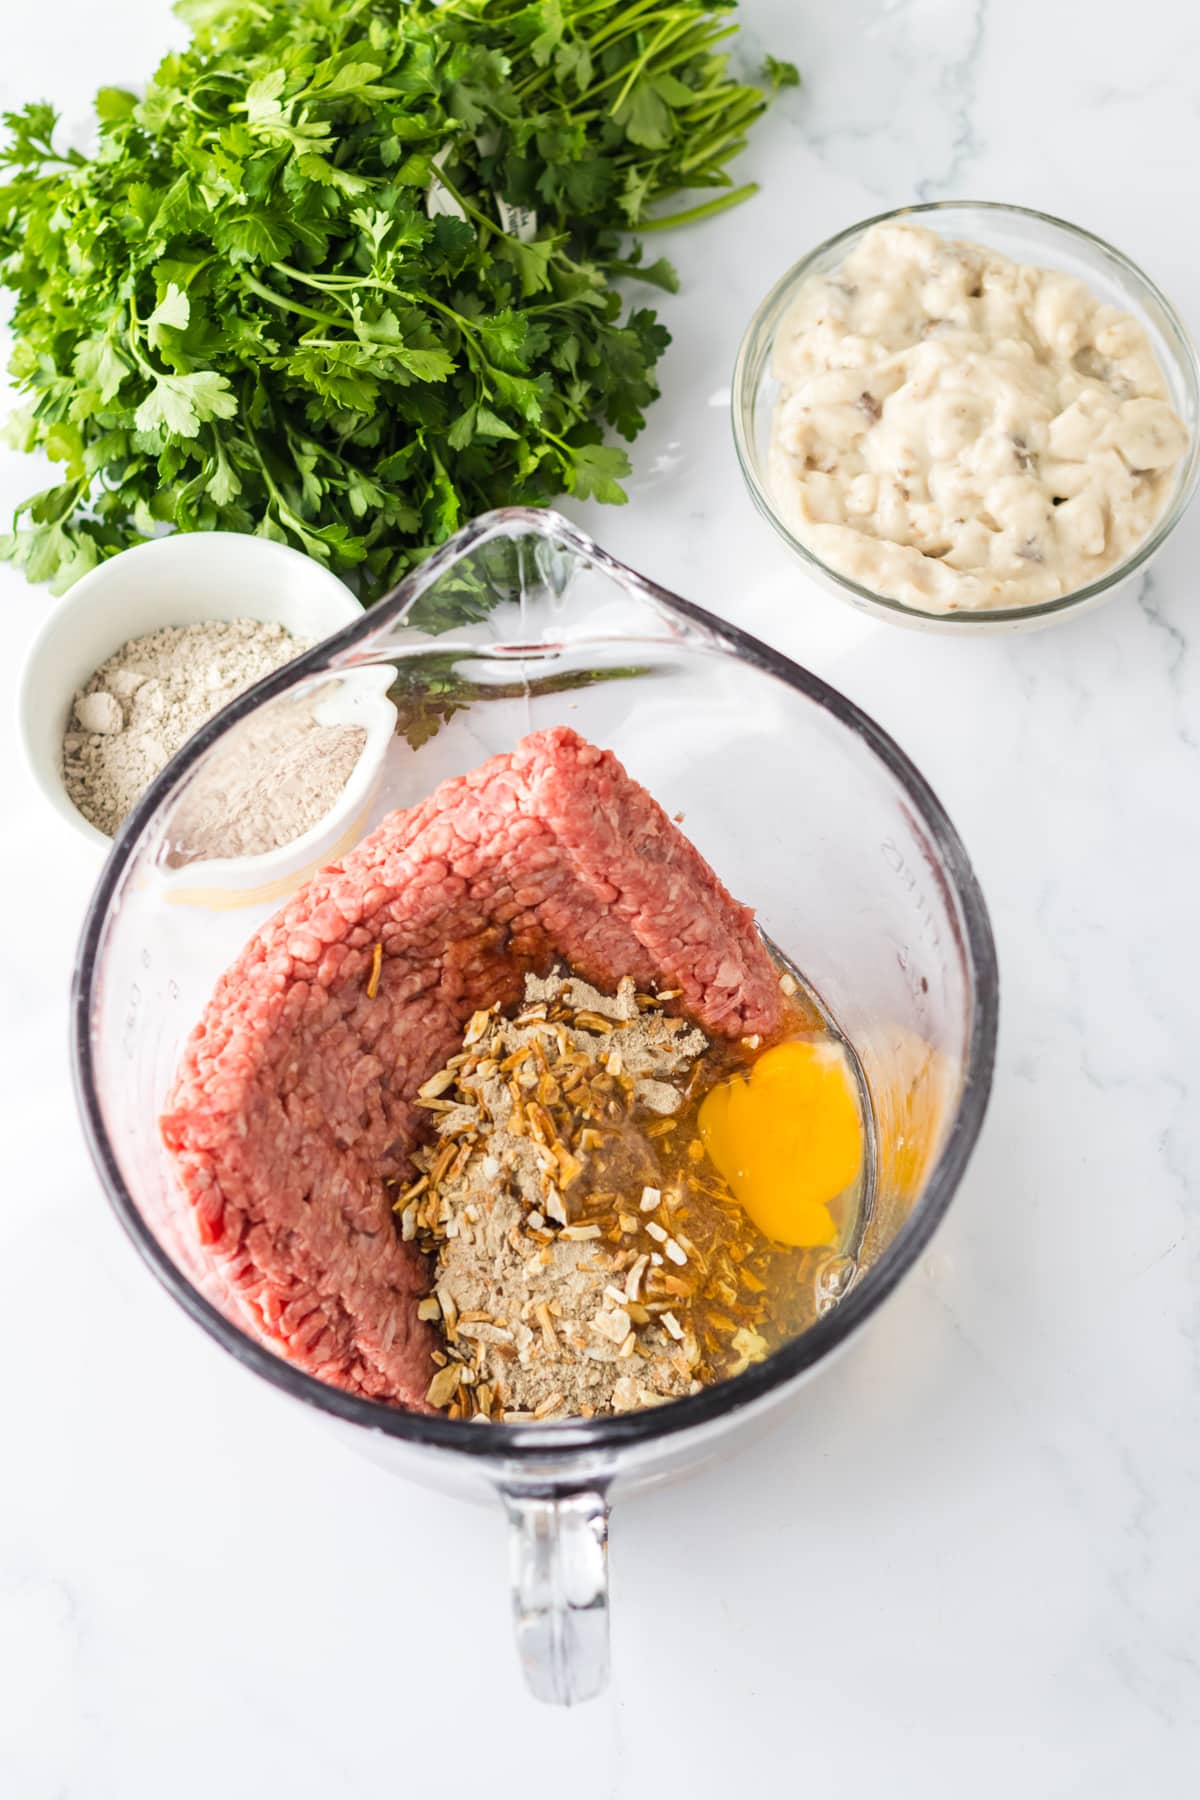 Part of making Slow Cooker Smothered Hamburgers is to prepare the patties. This process is done by combining ingredients such as ground beef, onion soup mix, egg, Worcestershire sauce, bread crumbs, and steak seasoning.